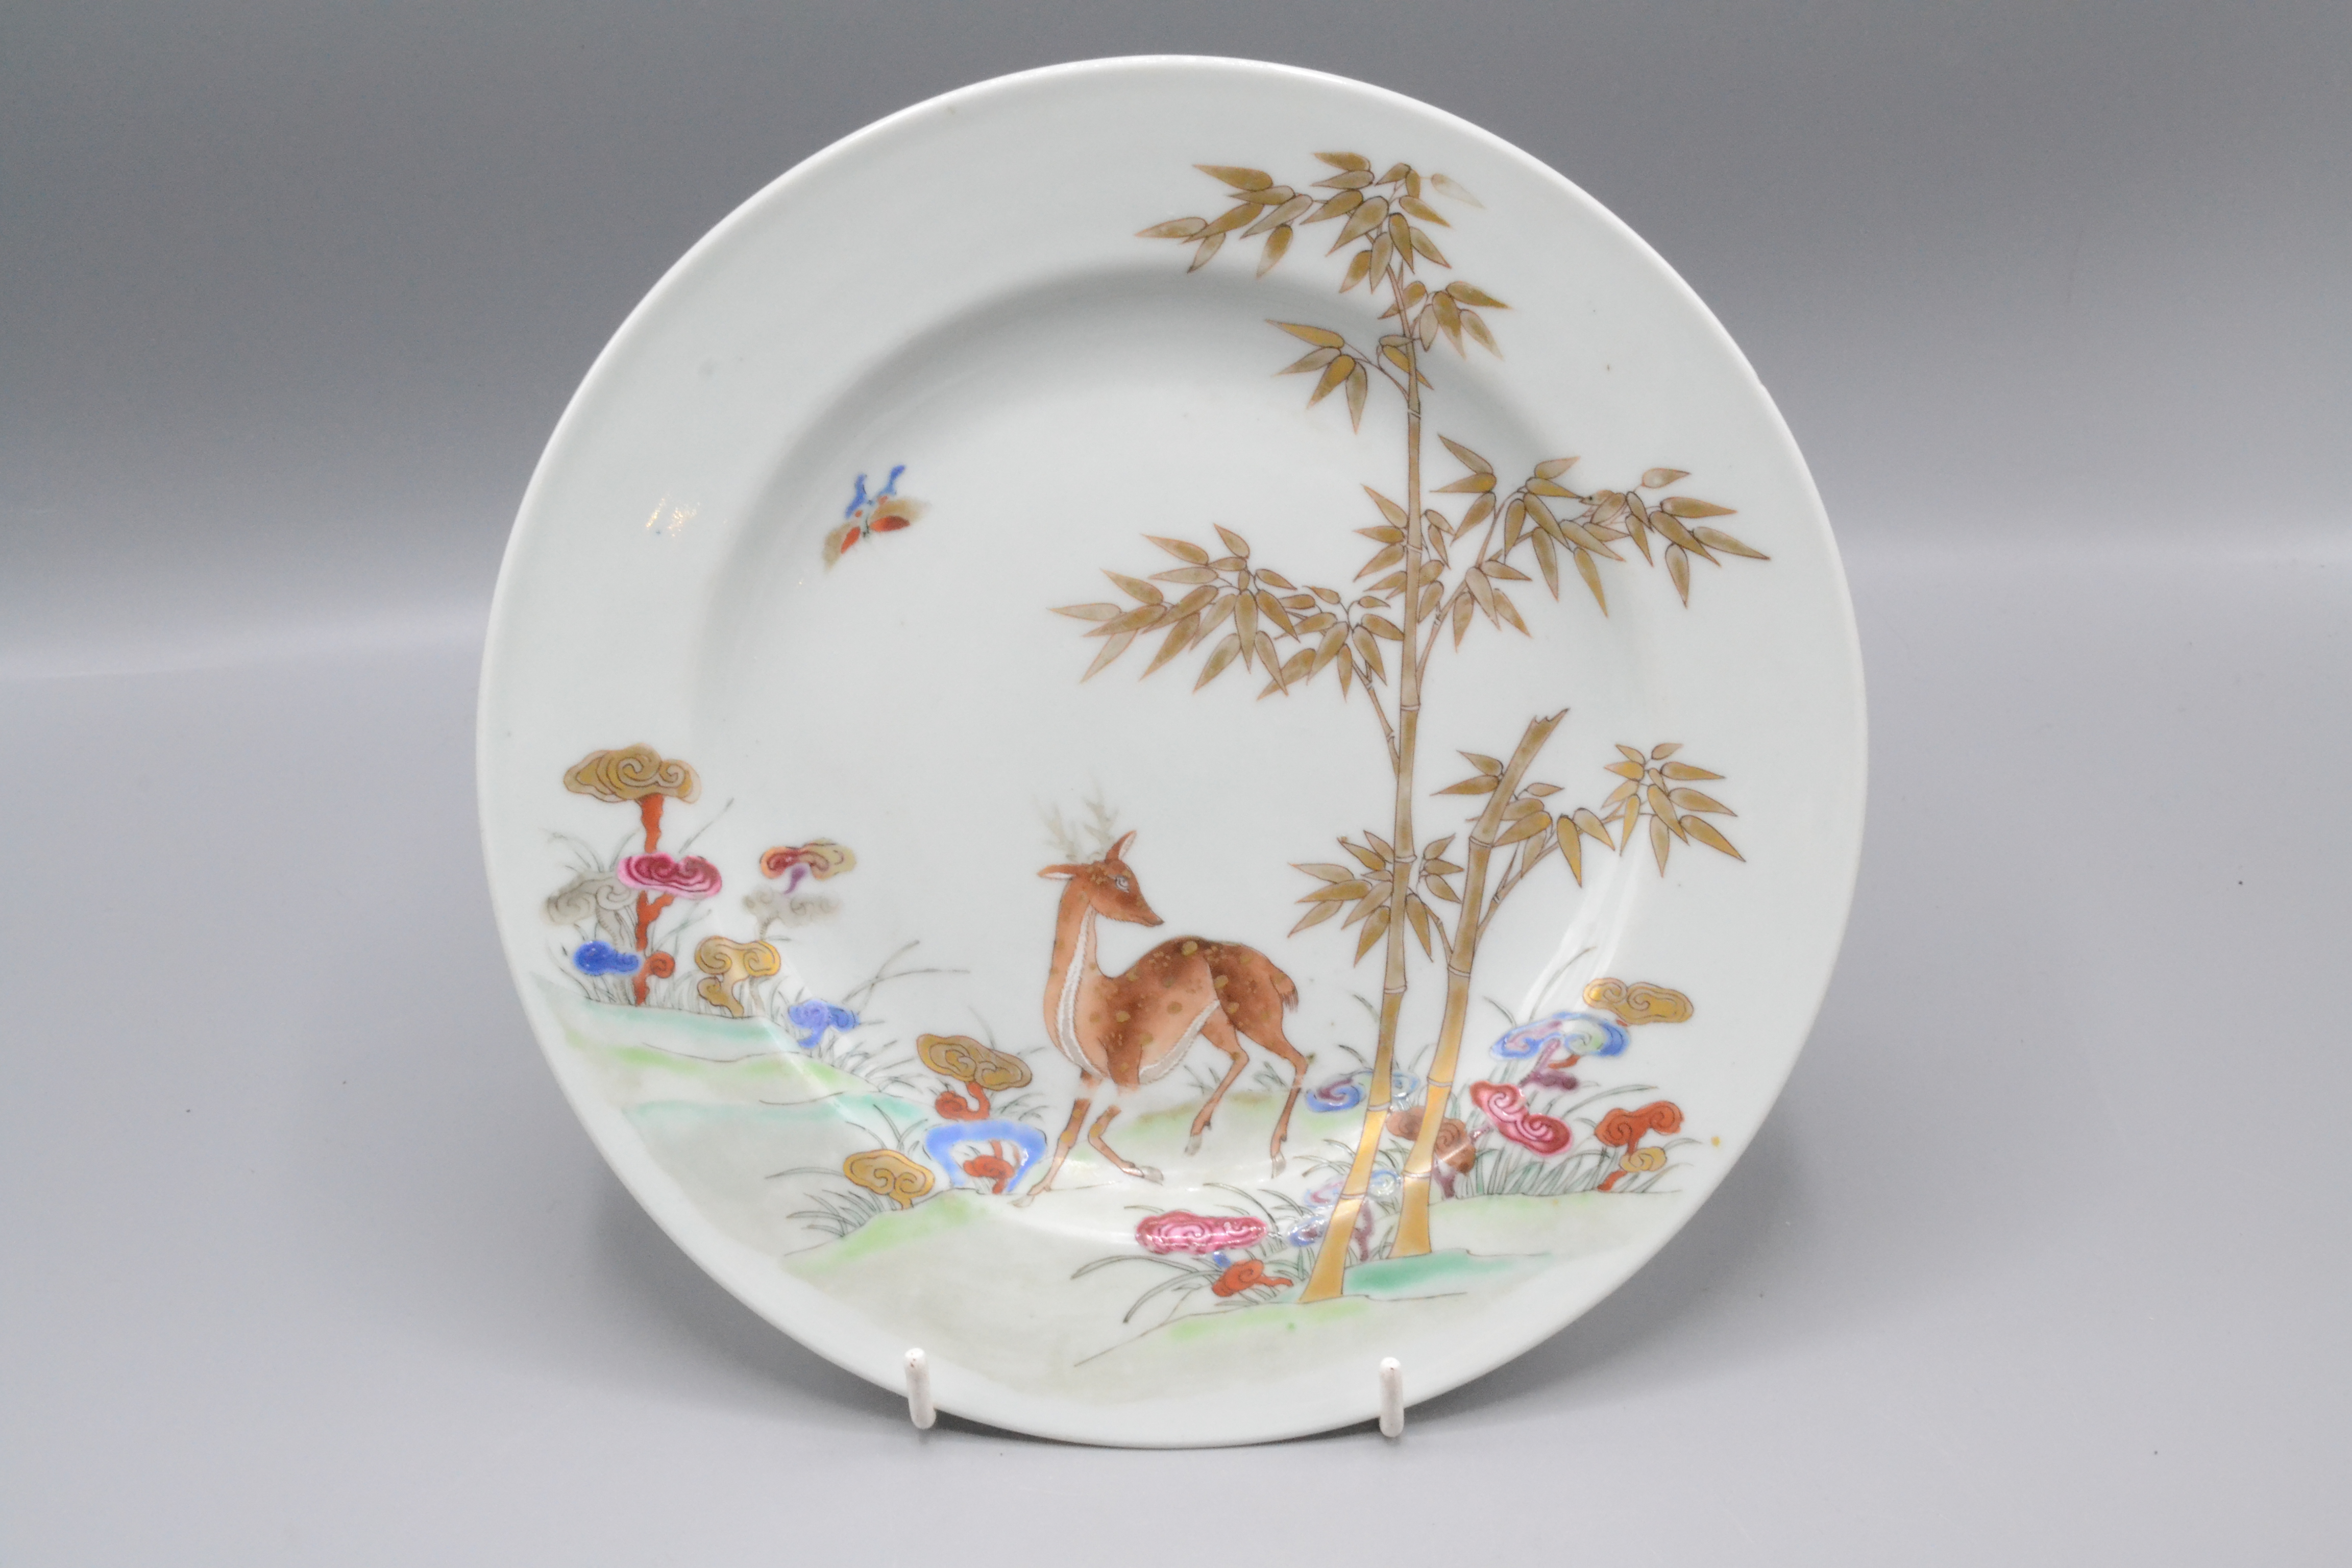 A Chinese export porcelain plate, 18th century, gilt decorated with a deer amongst foliage,